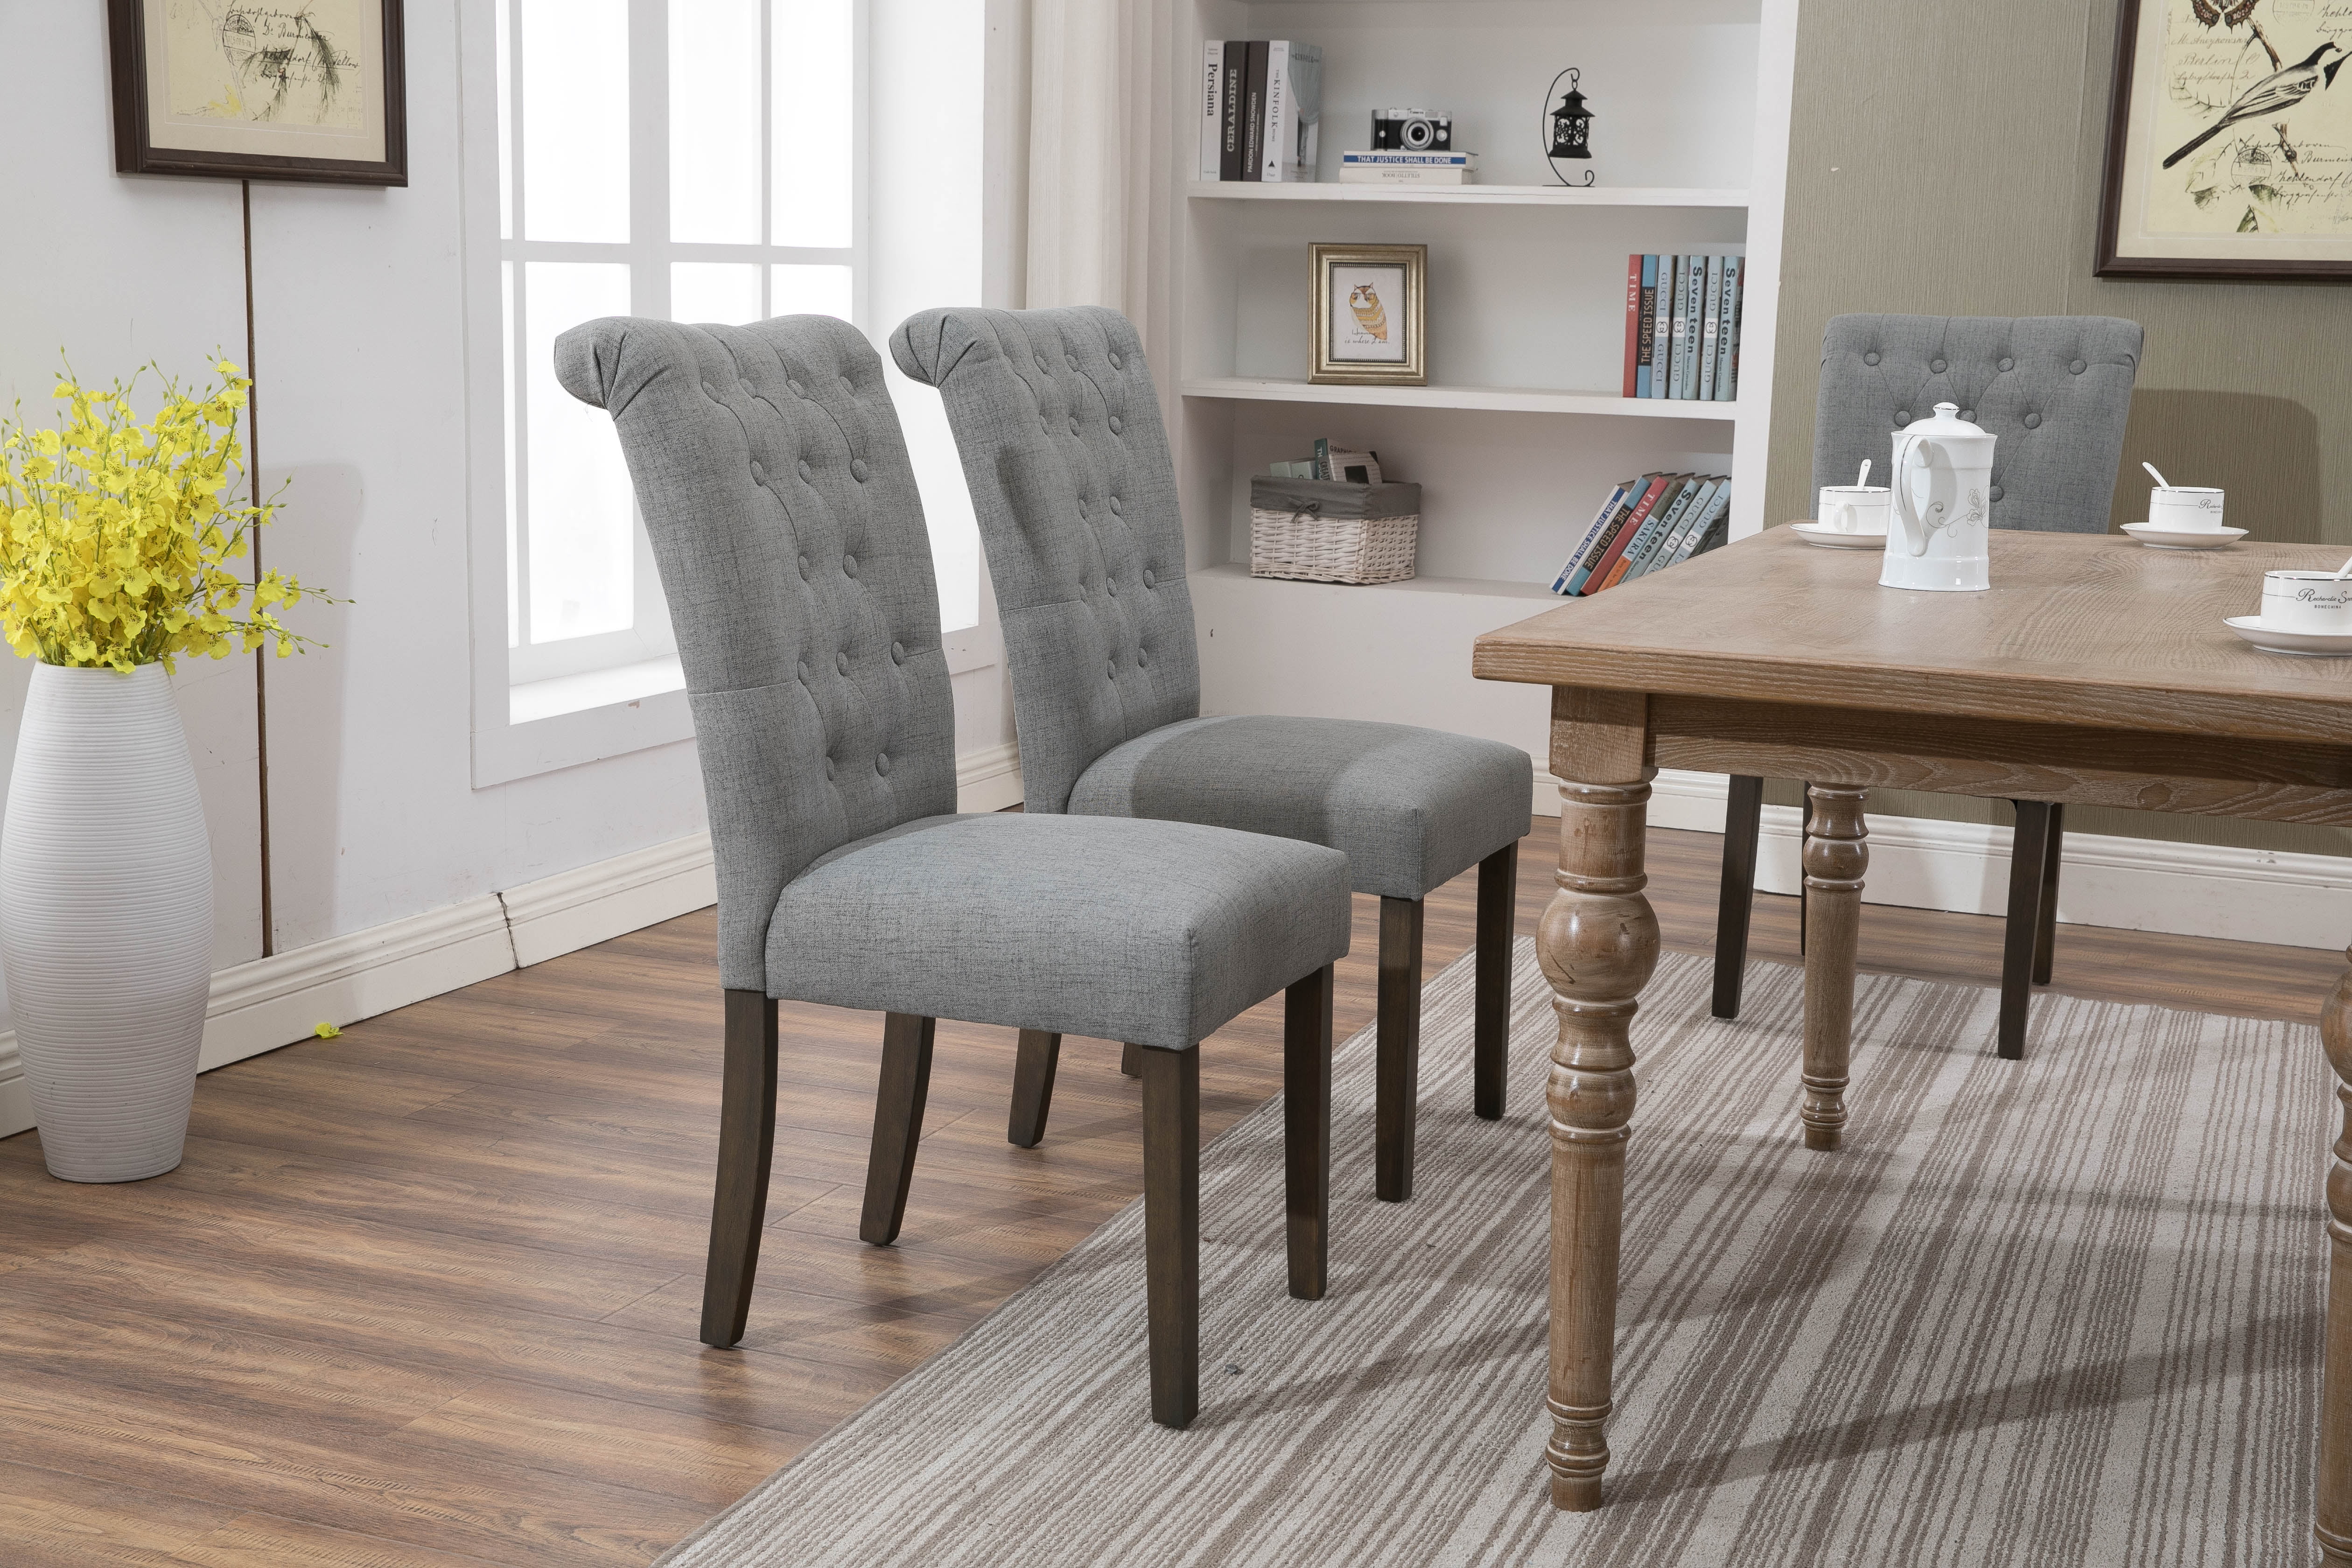 upholstered chairs in dining room